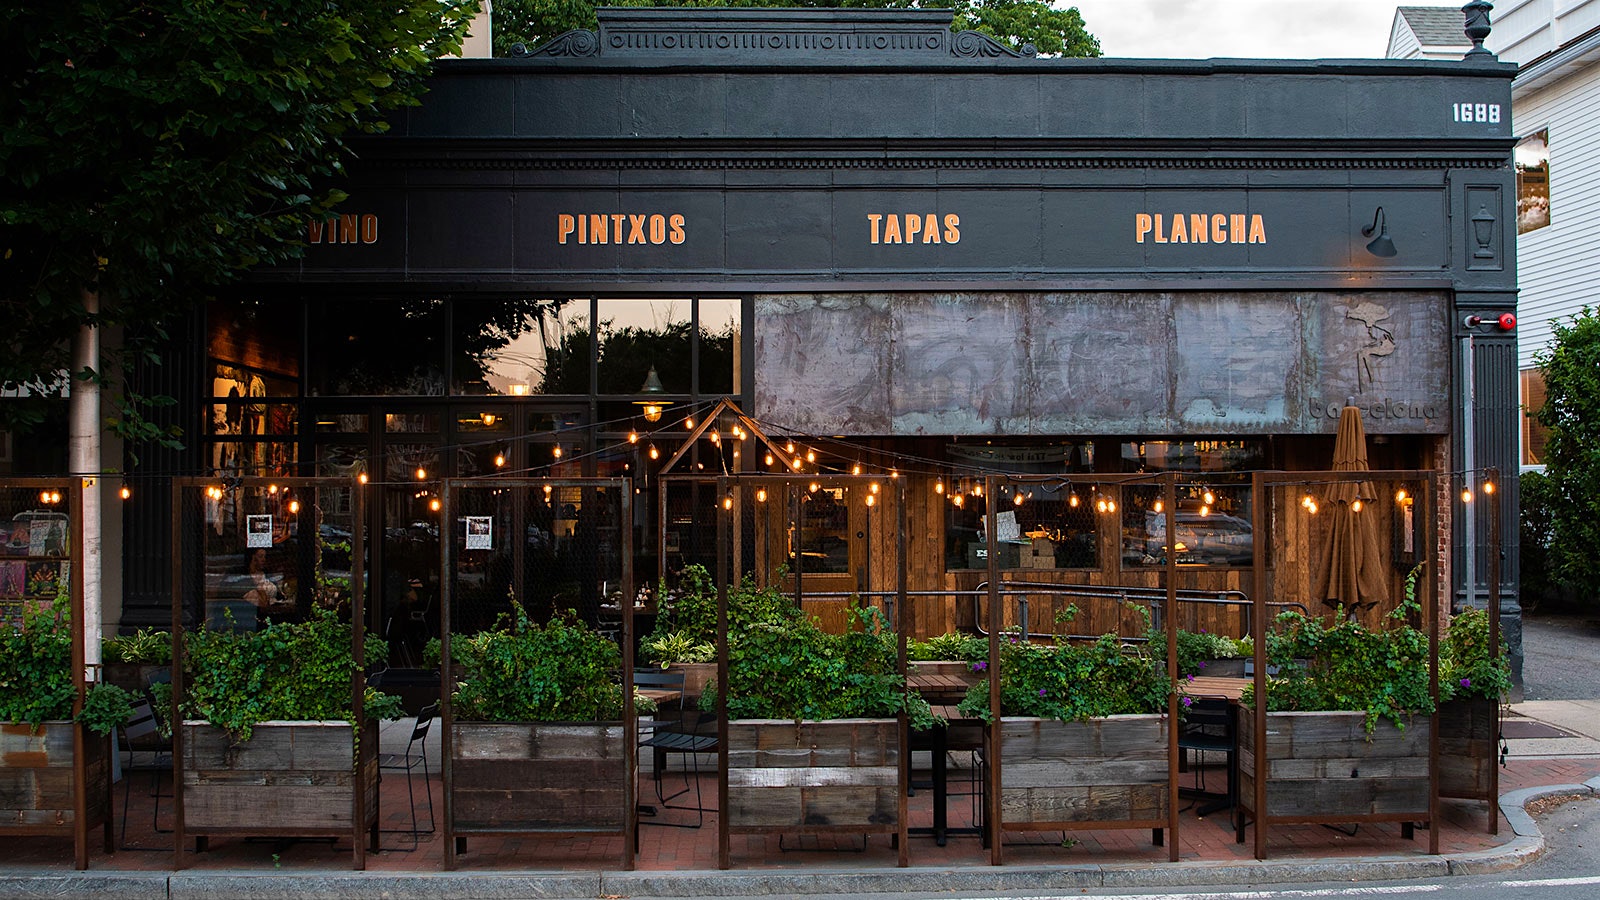  Exterior of Barcelona Wine Bar in Cambridge, Mass., with outdoor seating in front, set off by planters and decorated with string lights